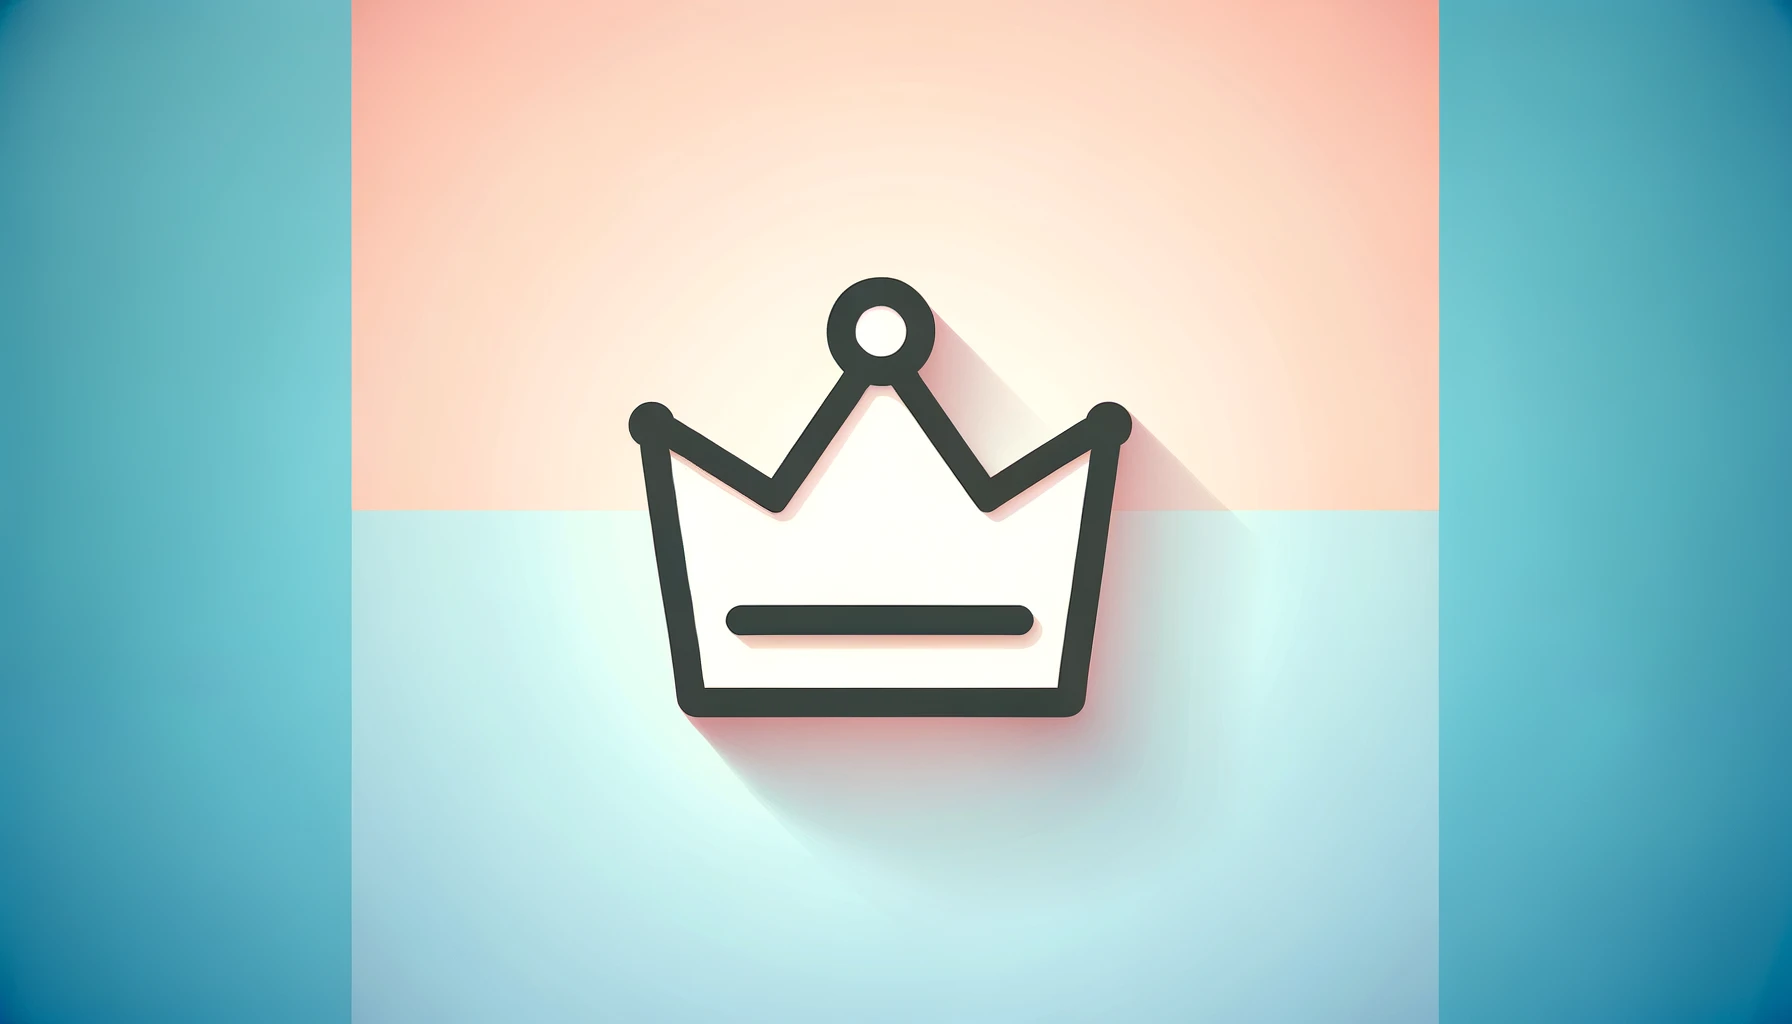 crown-symbol-representing-content-marketing-set-against-a-bright-and-positive-pastel-tone-background-embodying-creativity-and-value-in-cont.webp